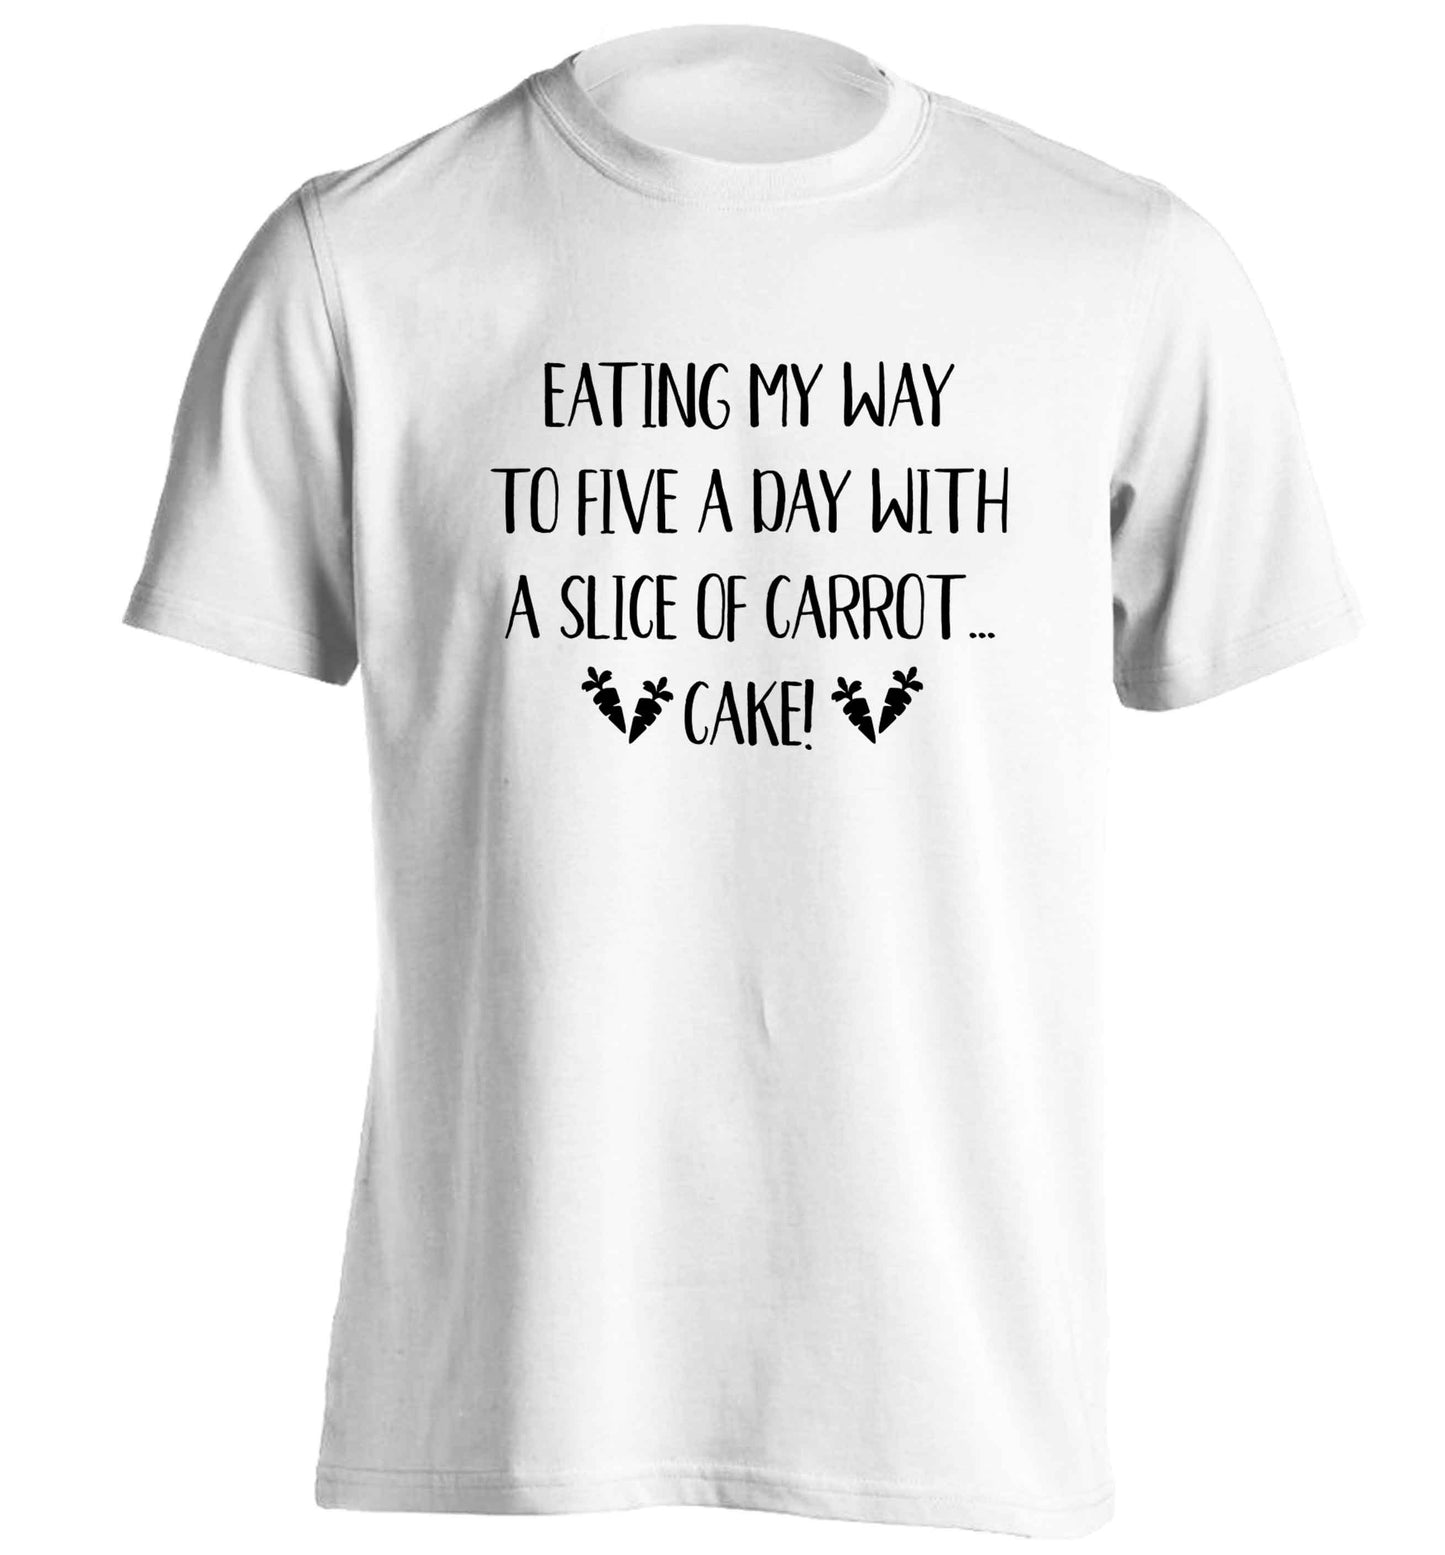 Eating my way to five a day with a slice of carrot cake day adults unisex white Tshirt 2XL